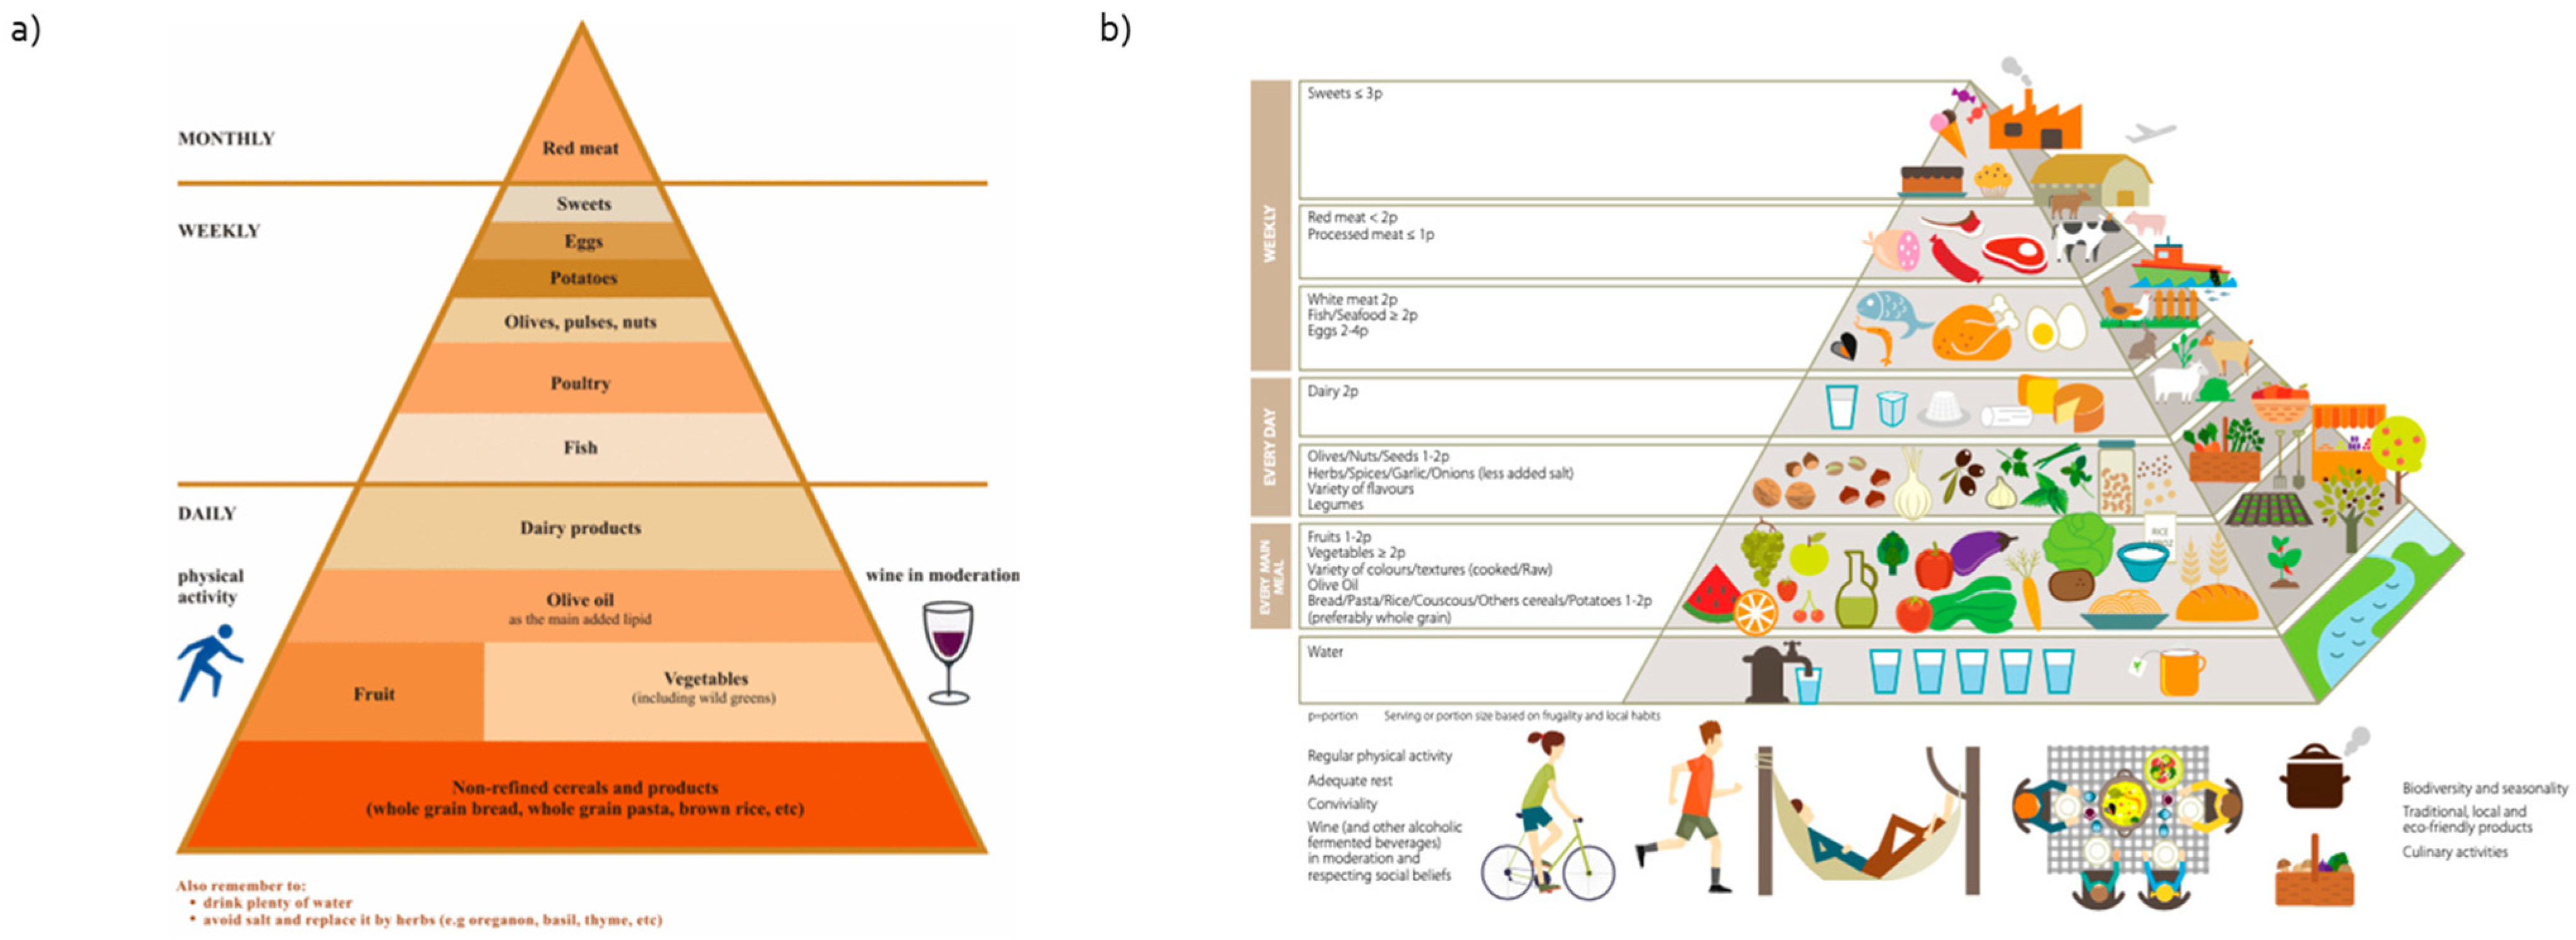 Nutrients Free Full Text Alignment Of Nutri Score With Mediterranean Diet Pyramid A Food